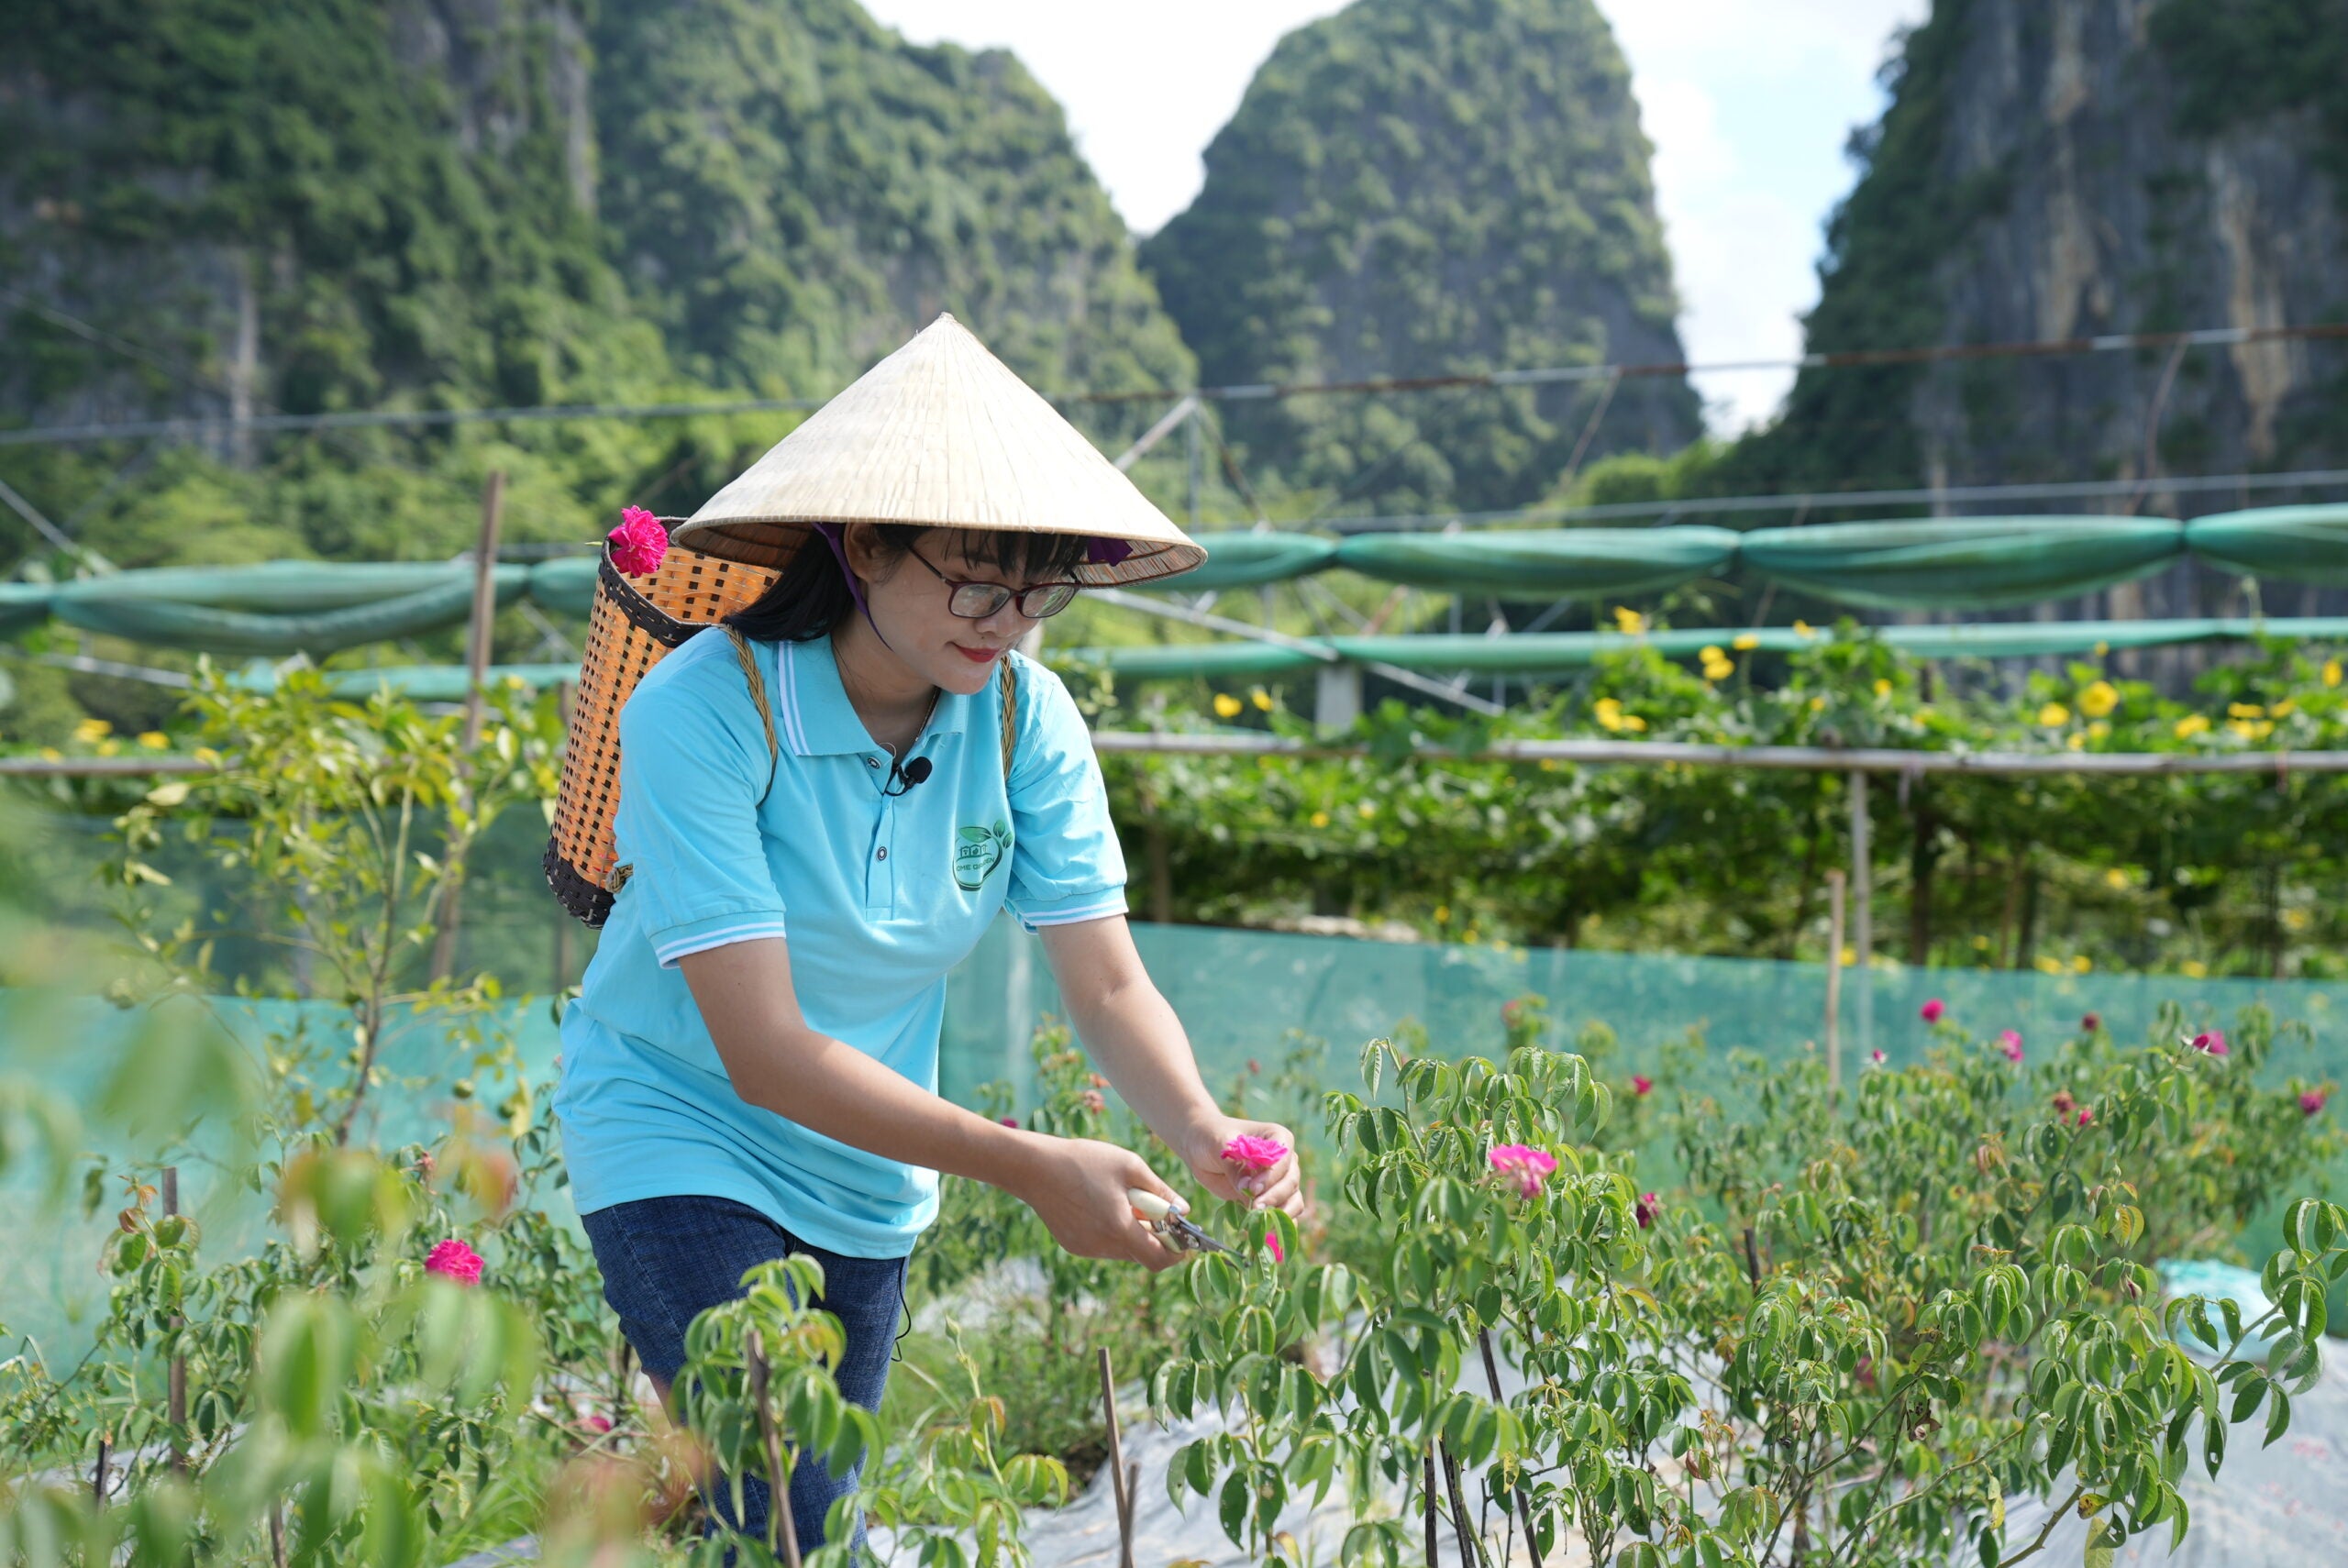 A young Viet woman wearing a light blue collared shirt and a conical hat picks flowers